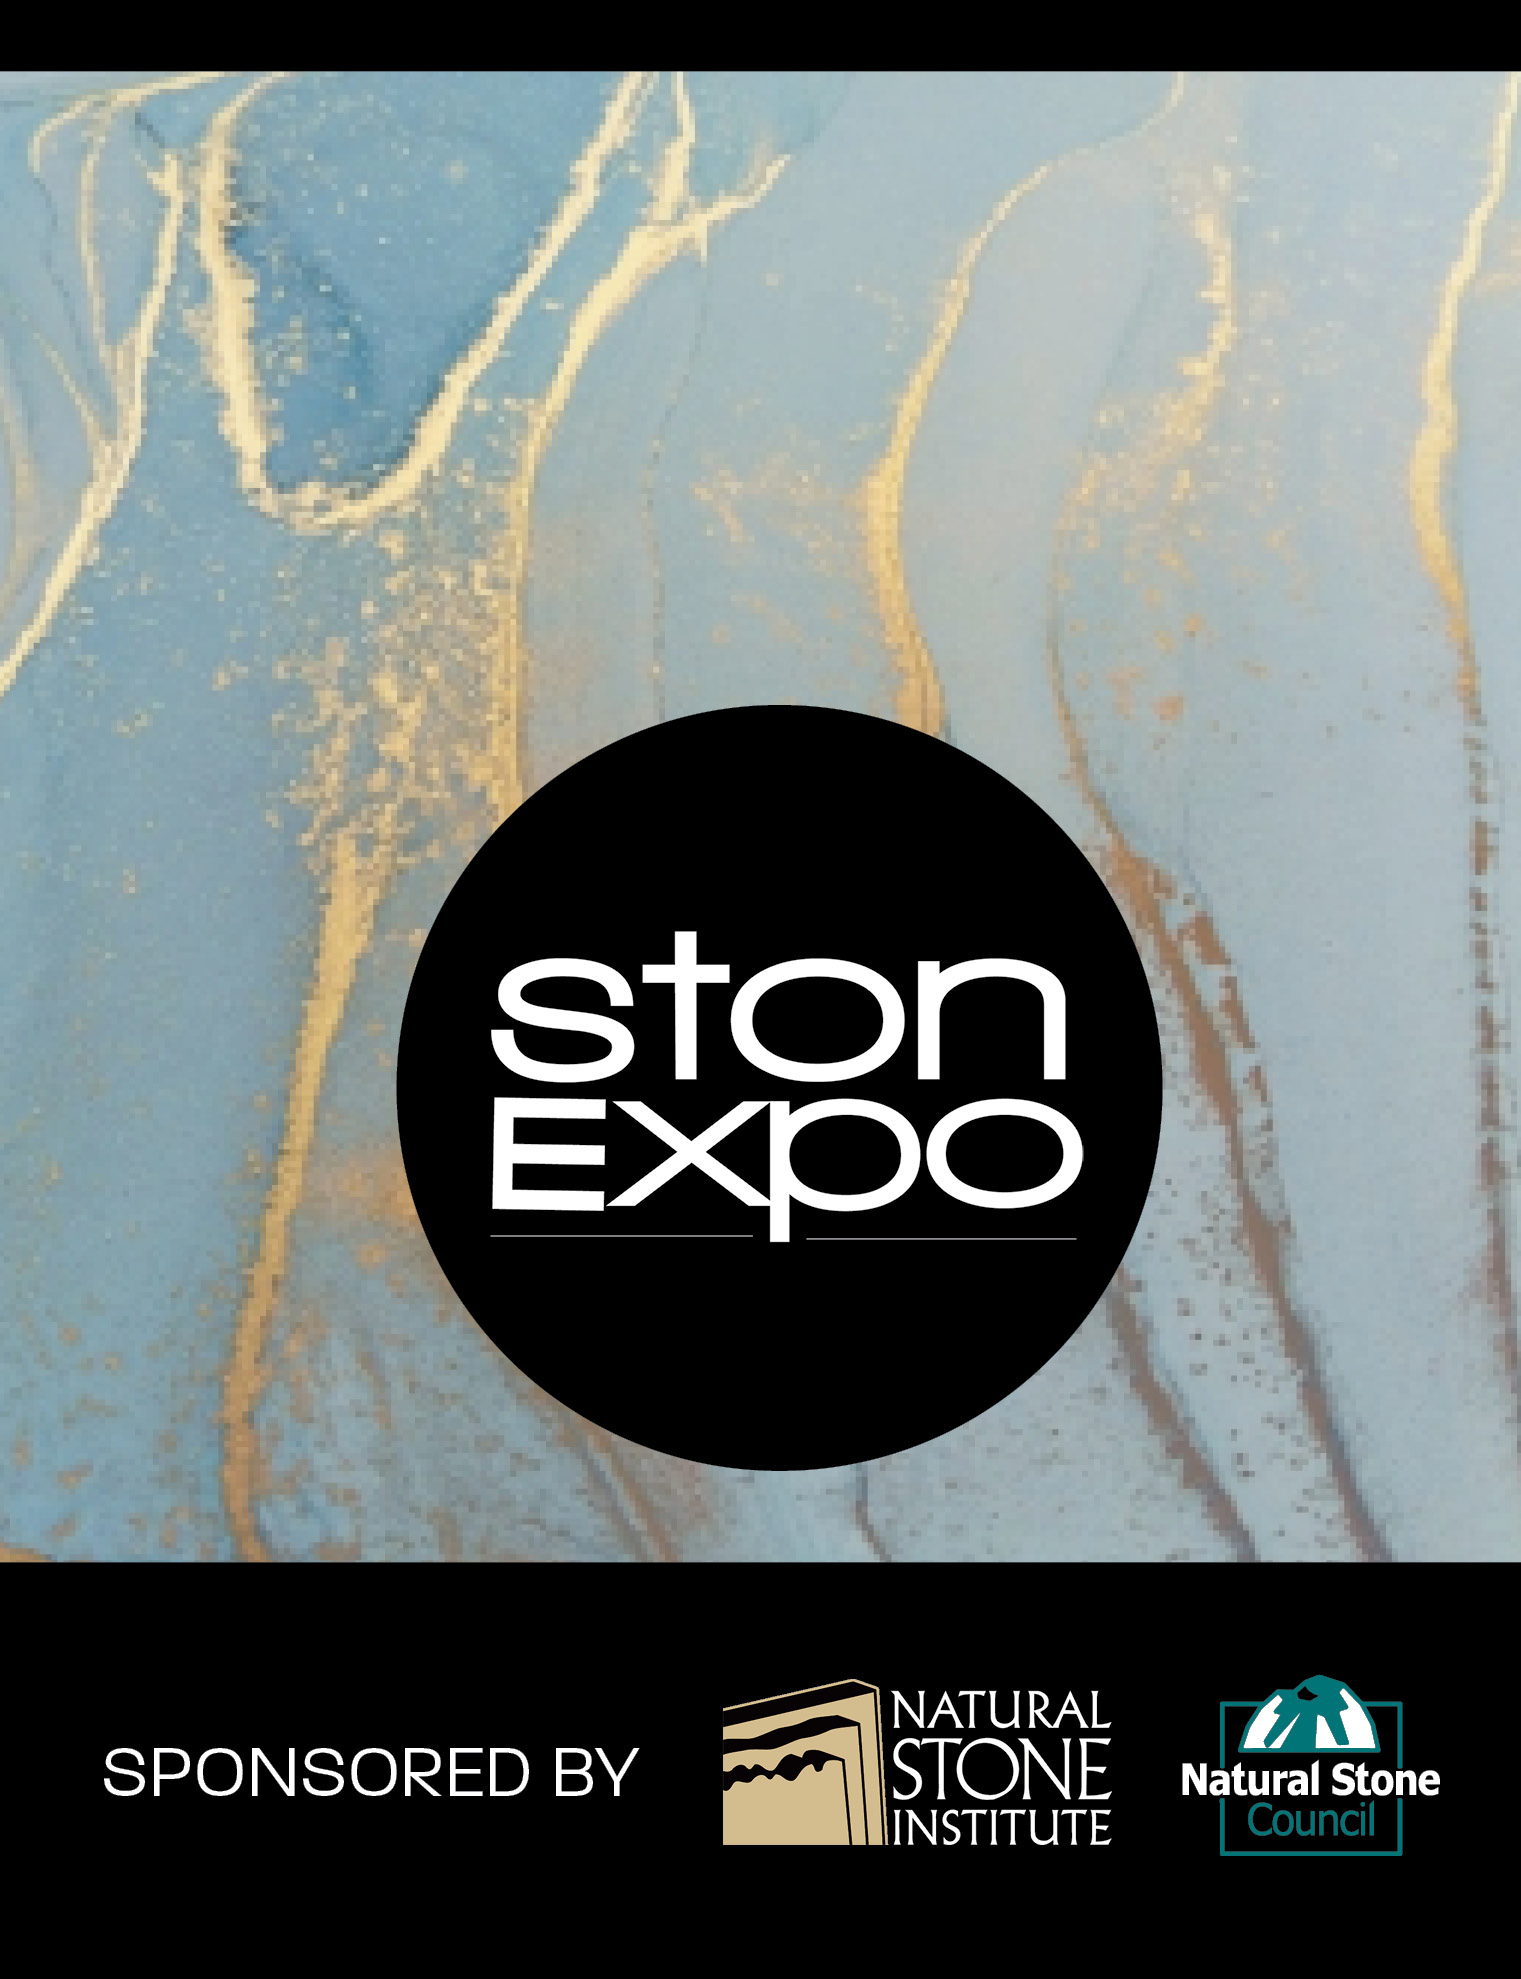 StonExpo Event Sponsor Natural Stone Institute and Natural Stone Council